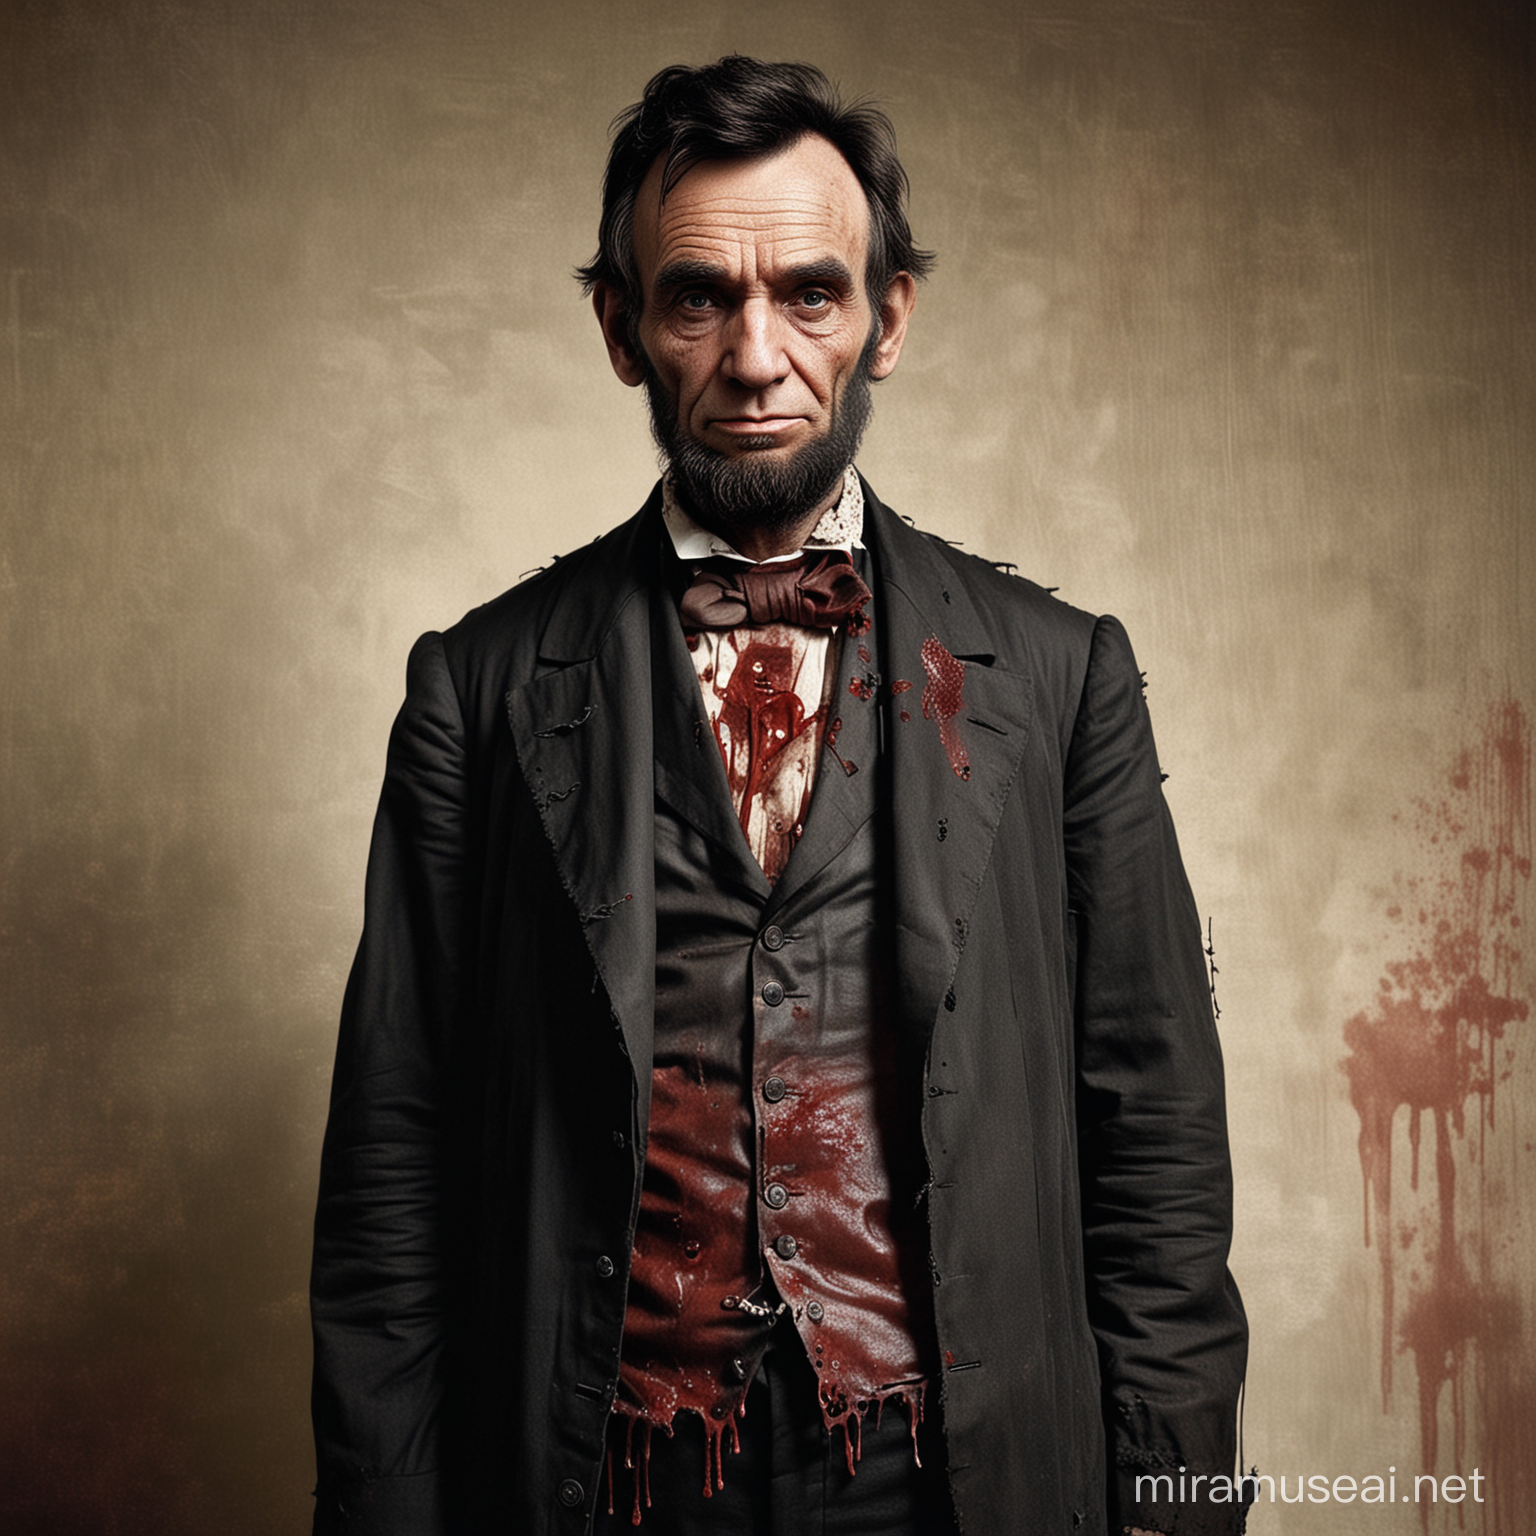 Abraham Lincoln in Tattered and Bloody Clothing